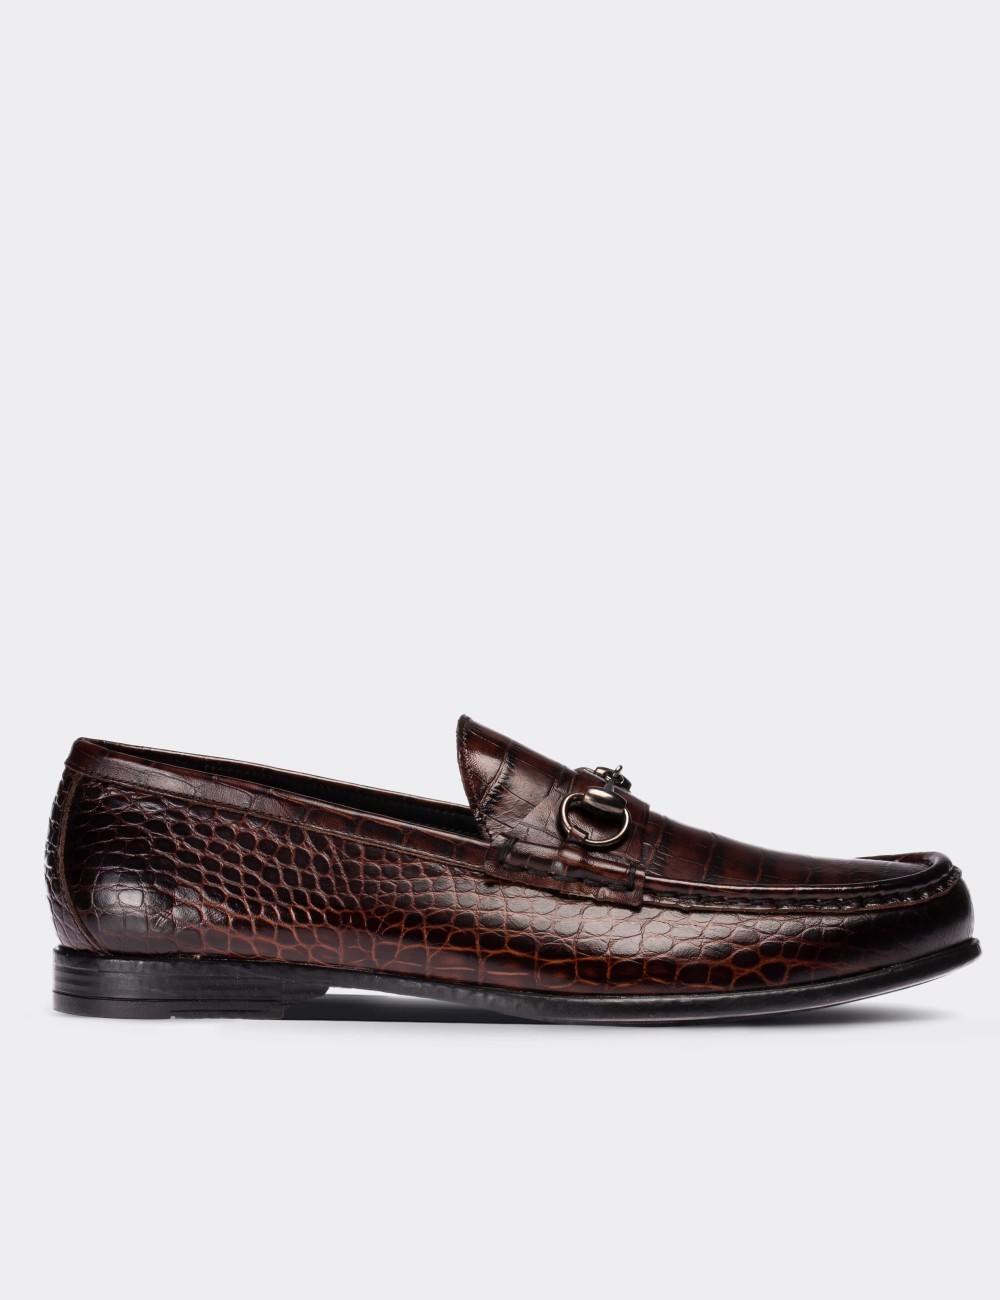 Brown Calfskin Leather Loafers - Deery